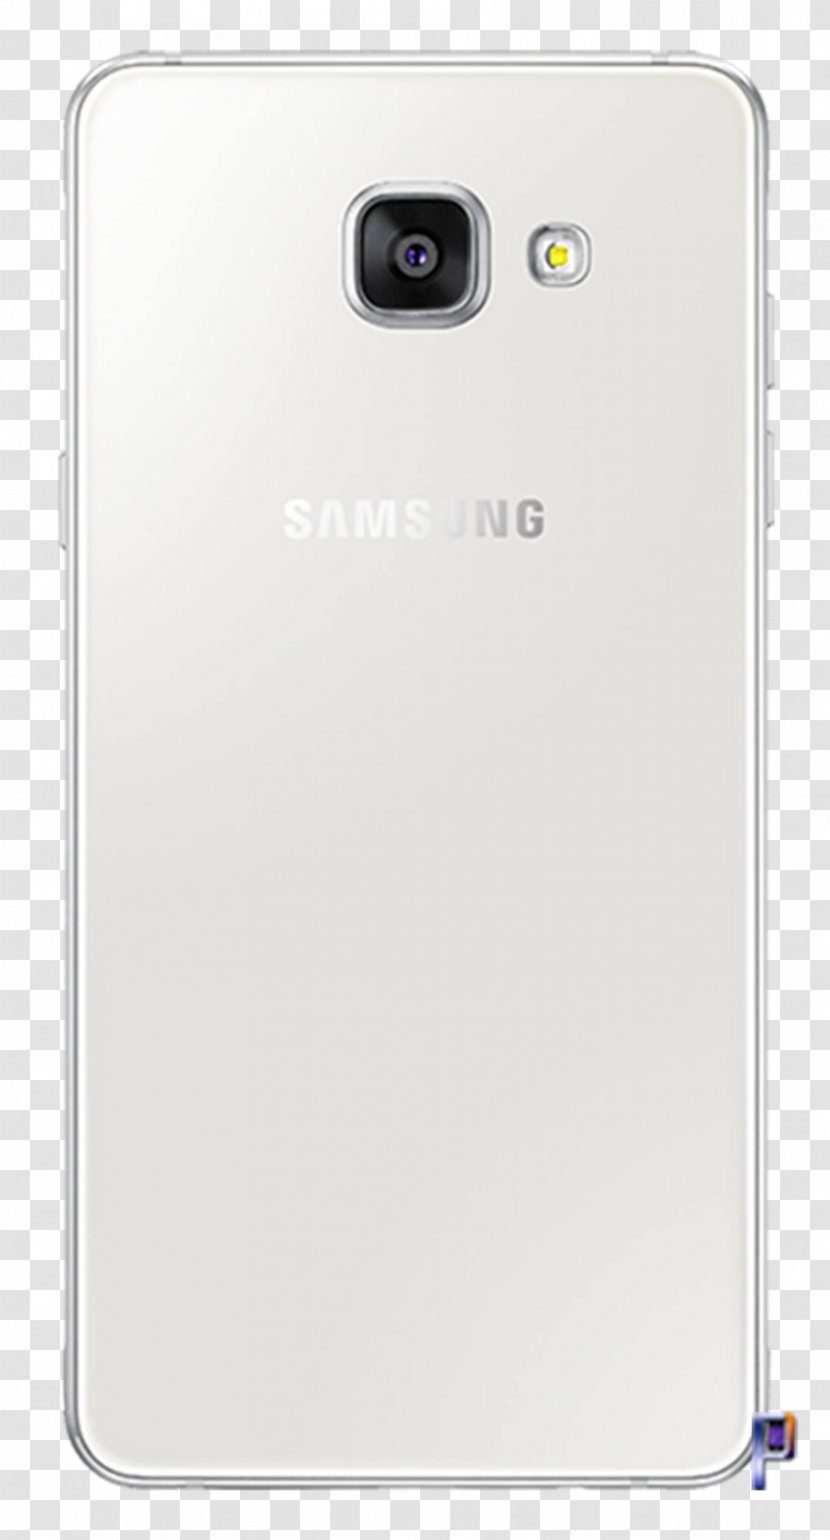 Smartphone Samsung Galaxy A5 (2017) Android - Megapixel Transparent PNG